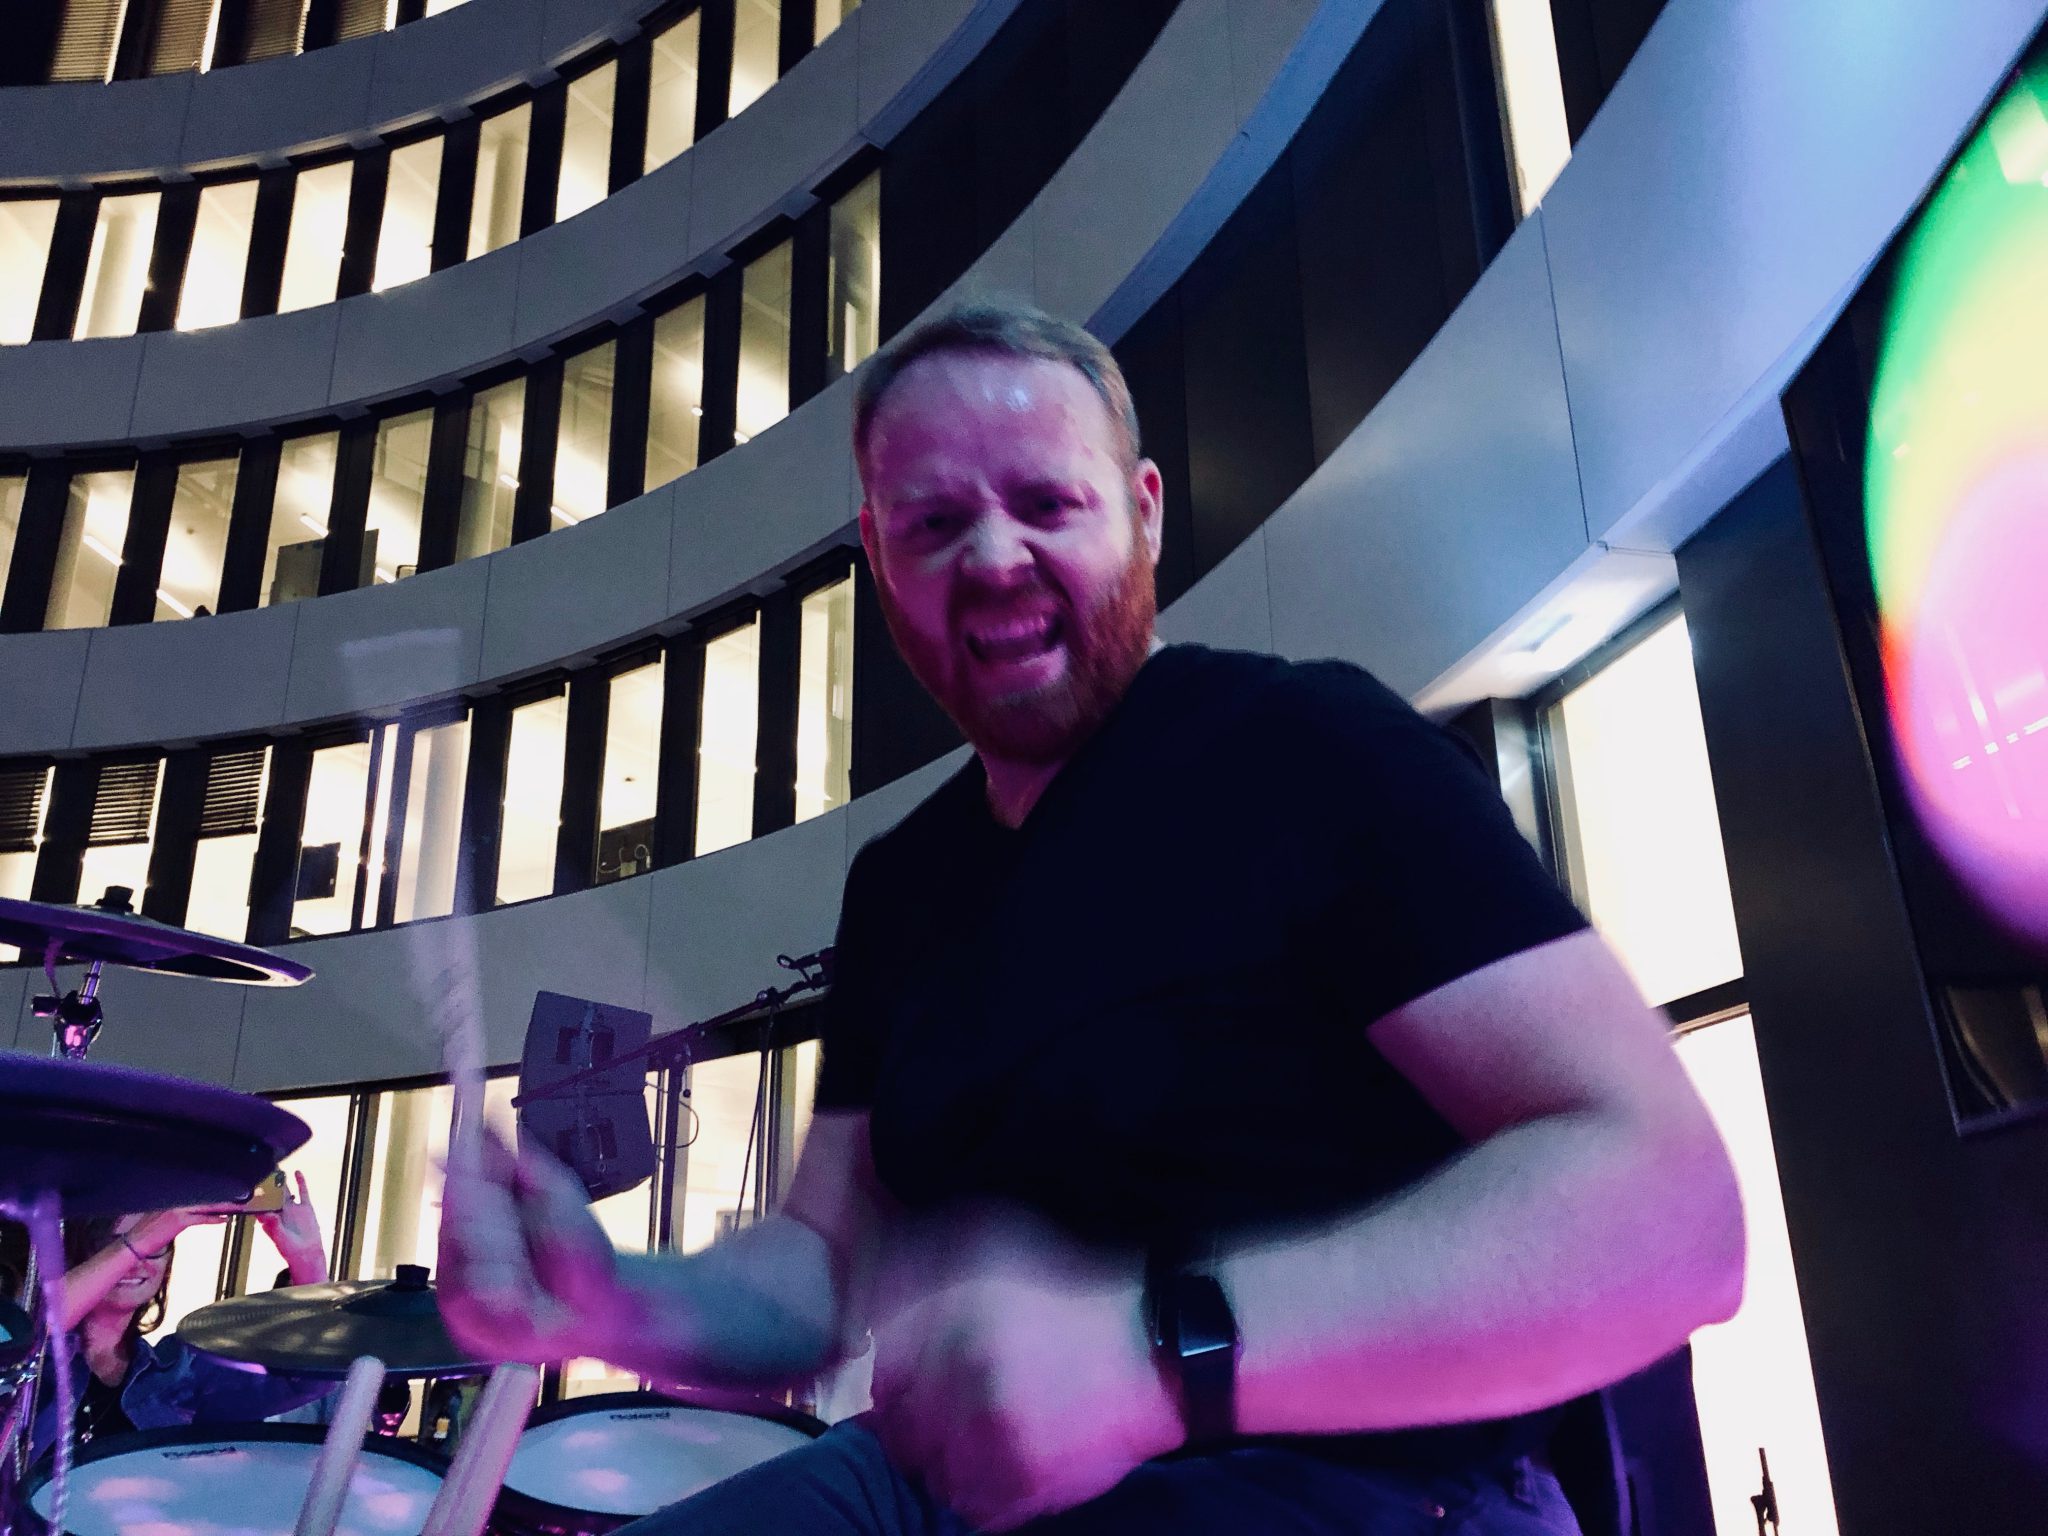 Solo drummer Drumson performs at the German headquarters of trivago, performing on a Roland TD-30 electronic drumset